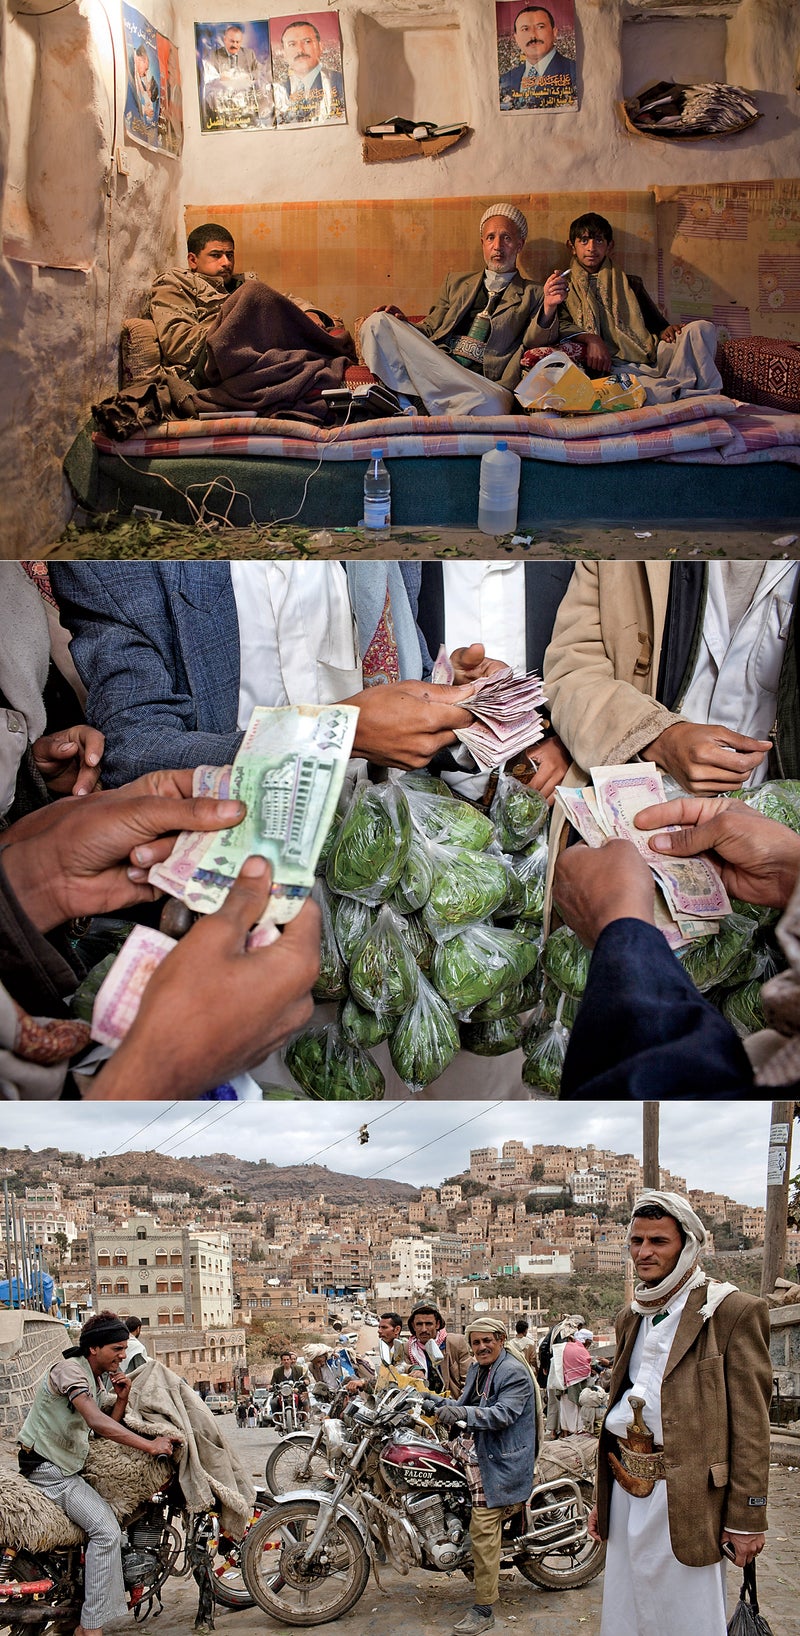 From top: A police checkpoint the village of Kawkaban; the daily khat transaction; makeshift motorcycle taxis for hire in Al Mahweet. Click to enlarge.